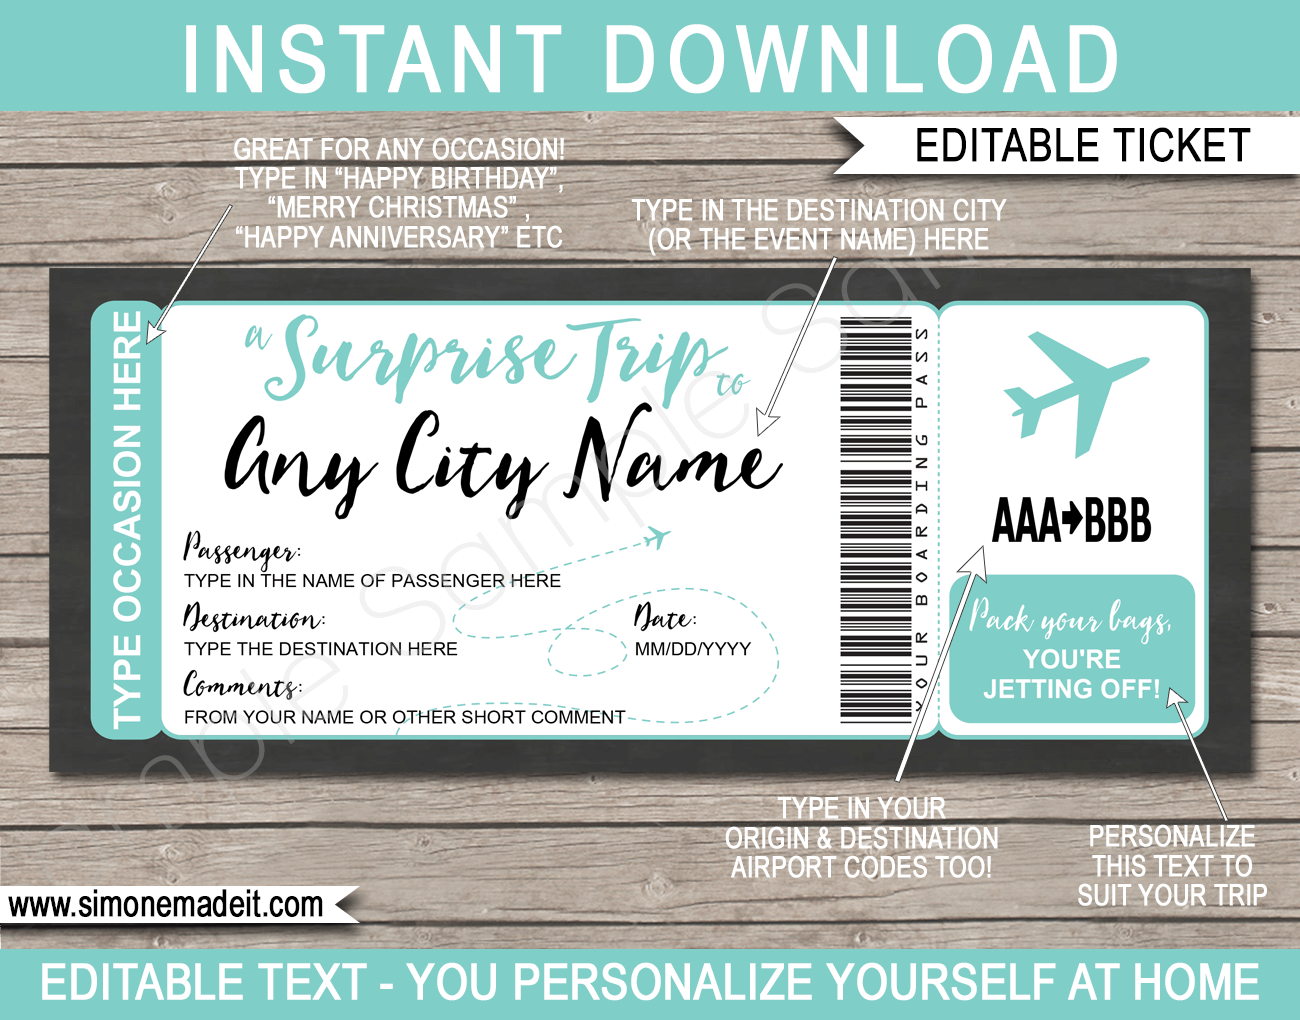 Free Printable Airline Ticket Template from www.giftsbysimonemadeit.com